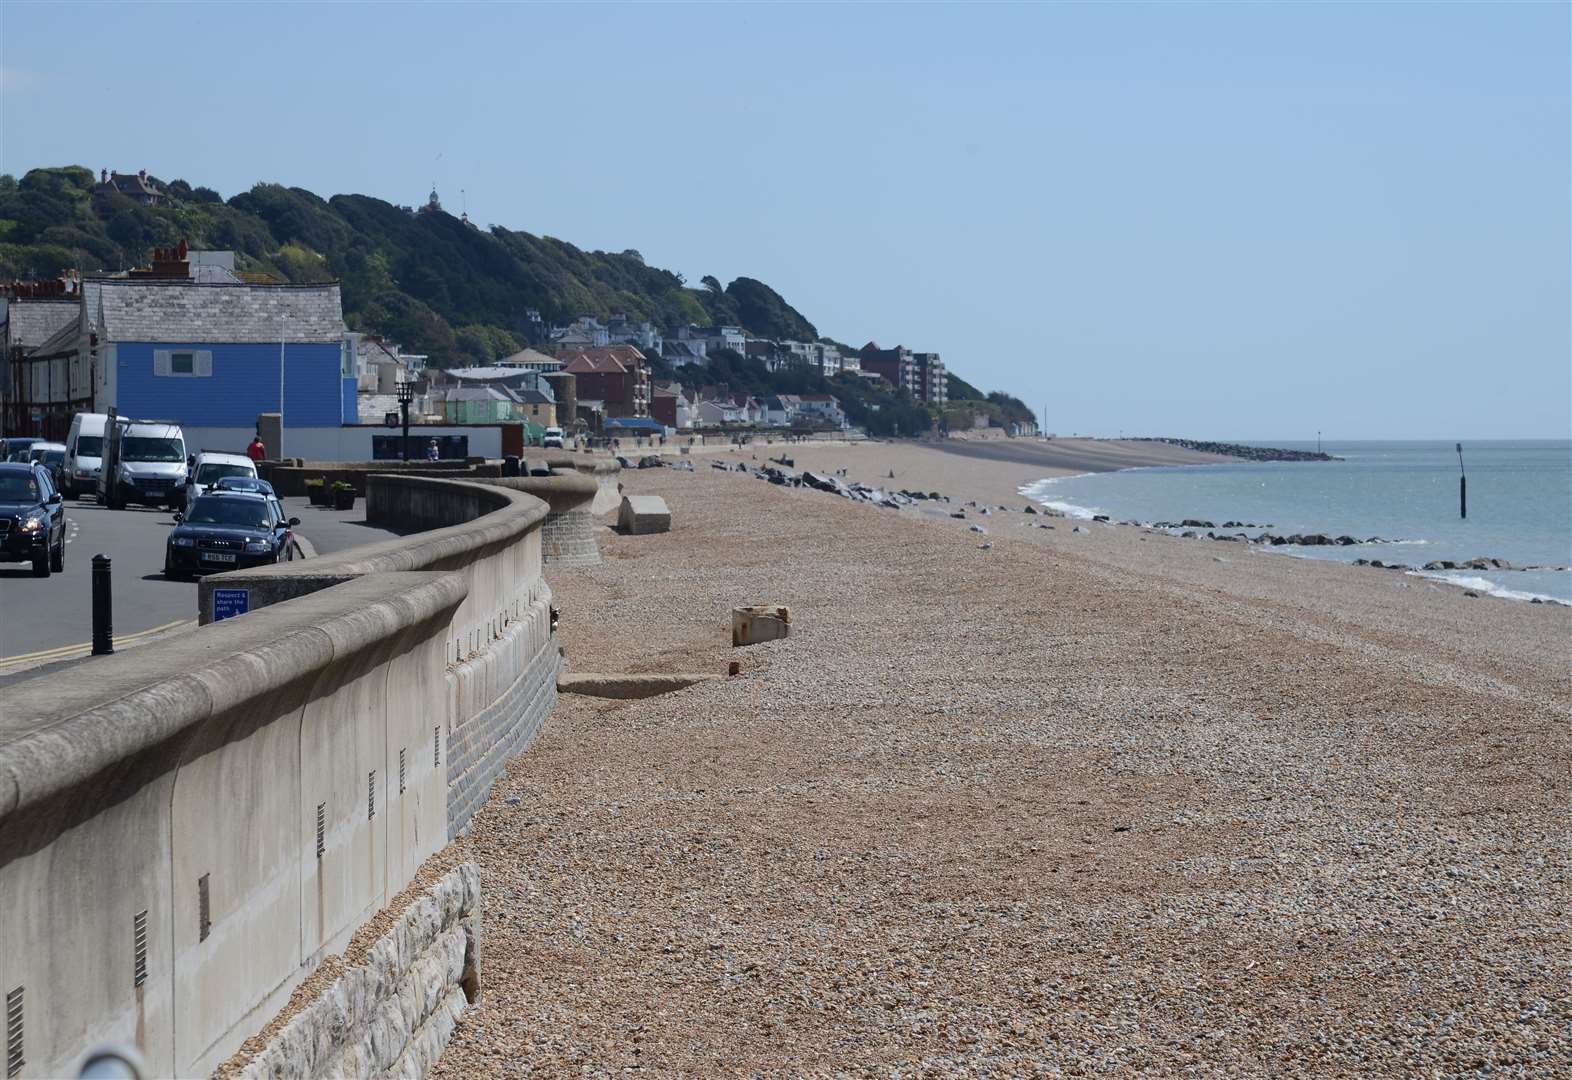 Sandgate tops the list of most searched seaside destinations on Airbnb